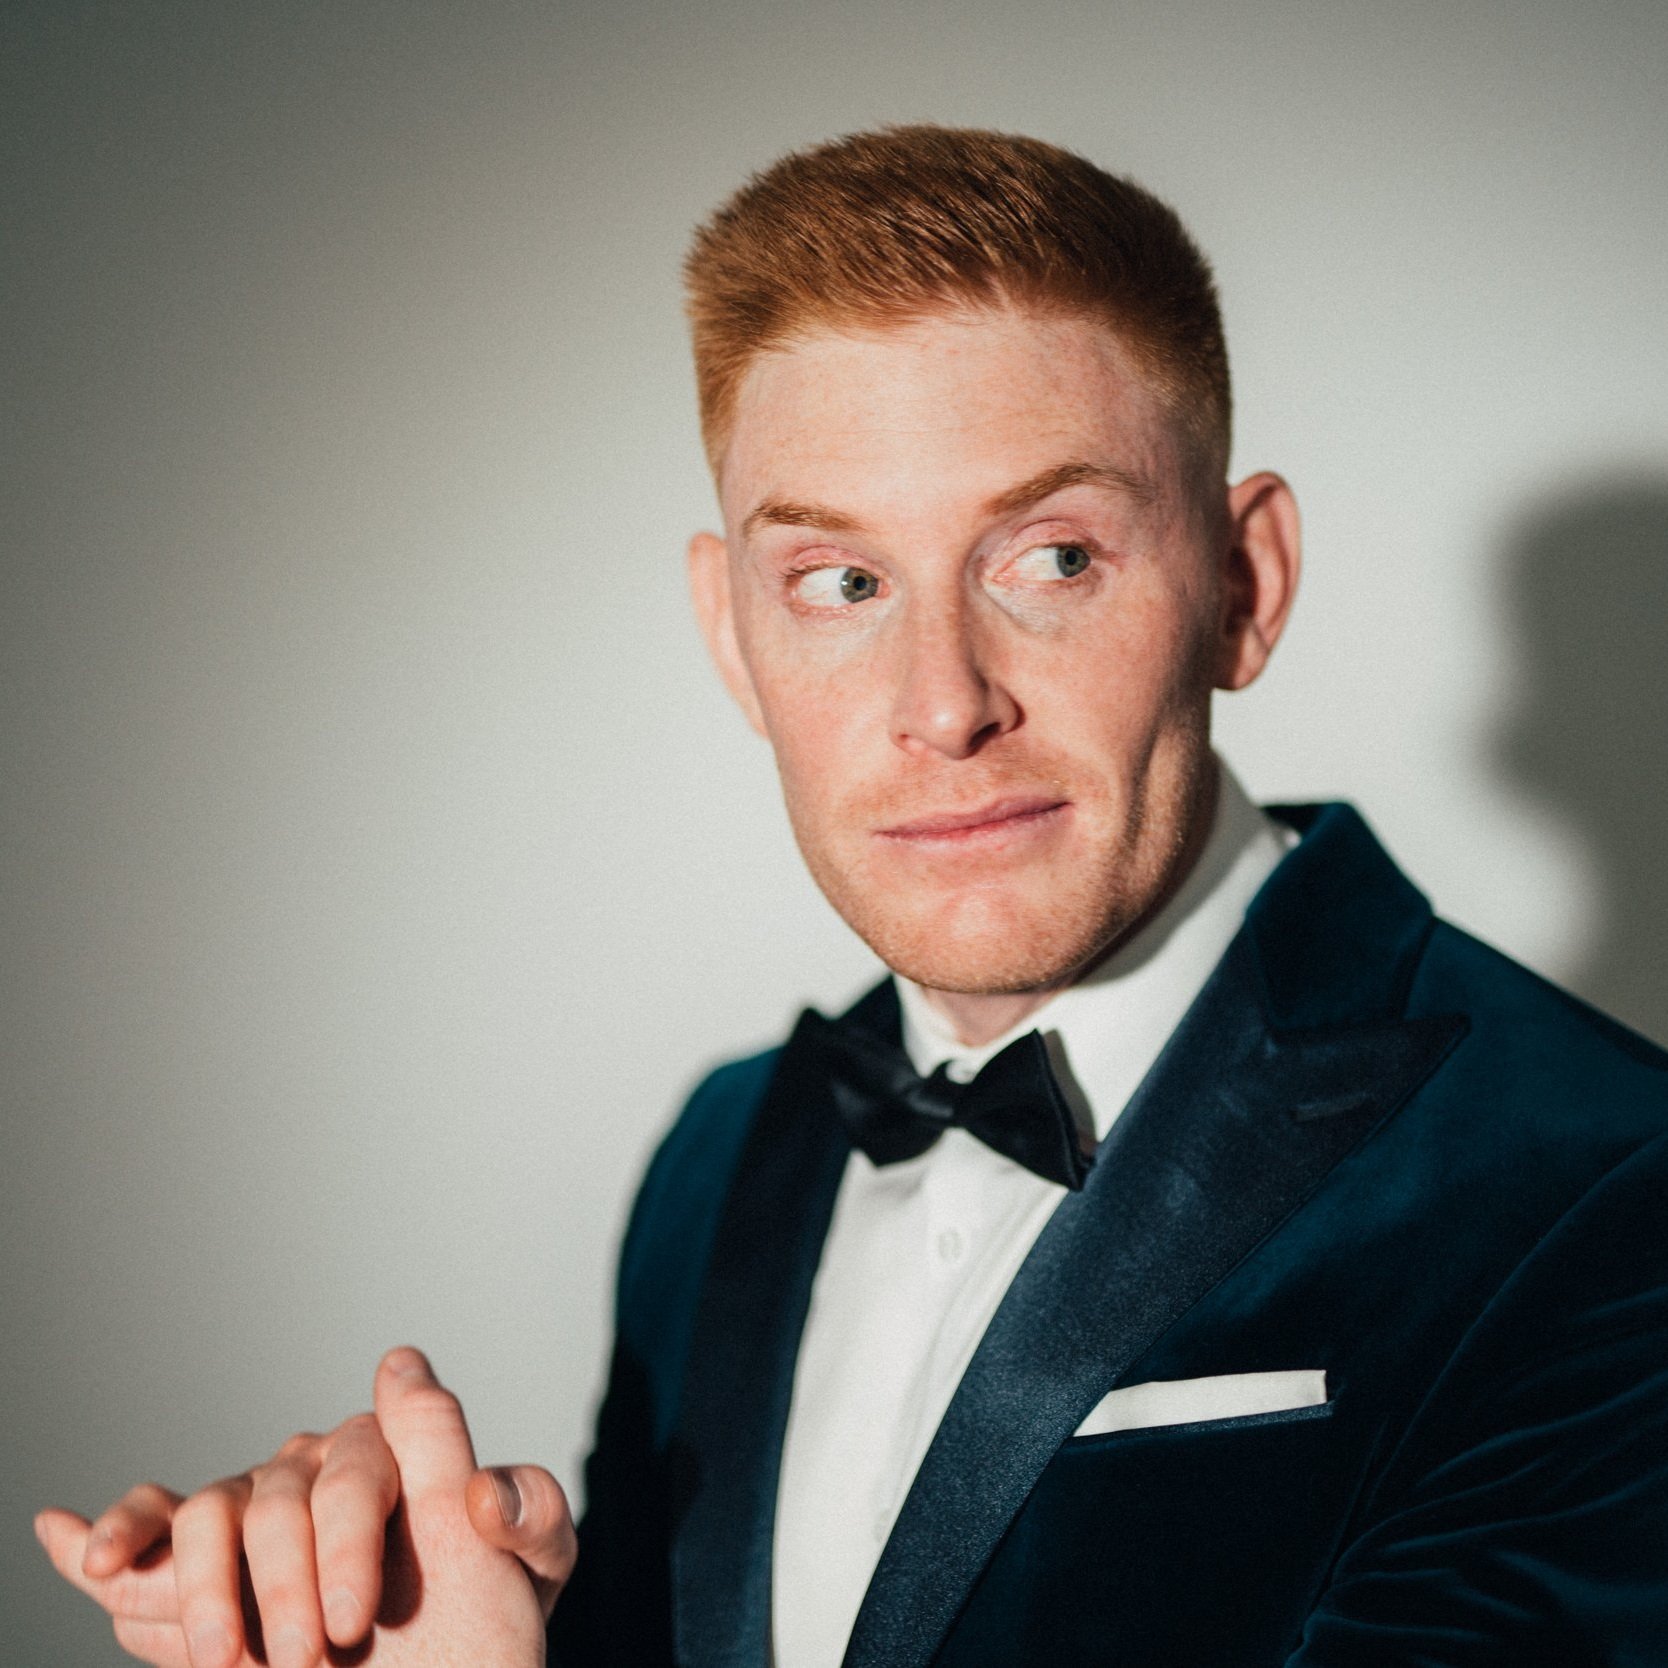  Matt Gore wearing a suit, posing confidently, with ginger hair and blue eyes. 